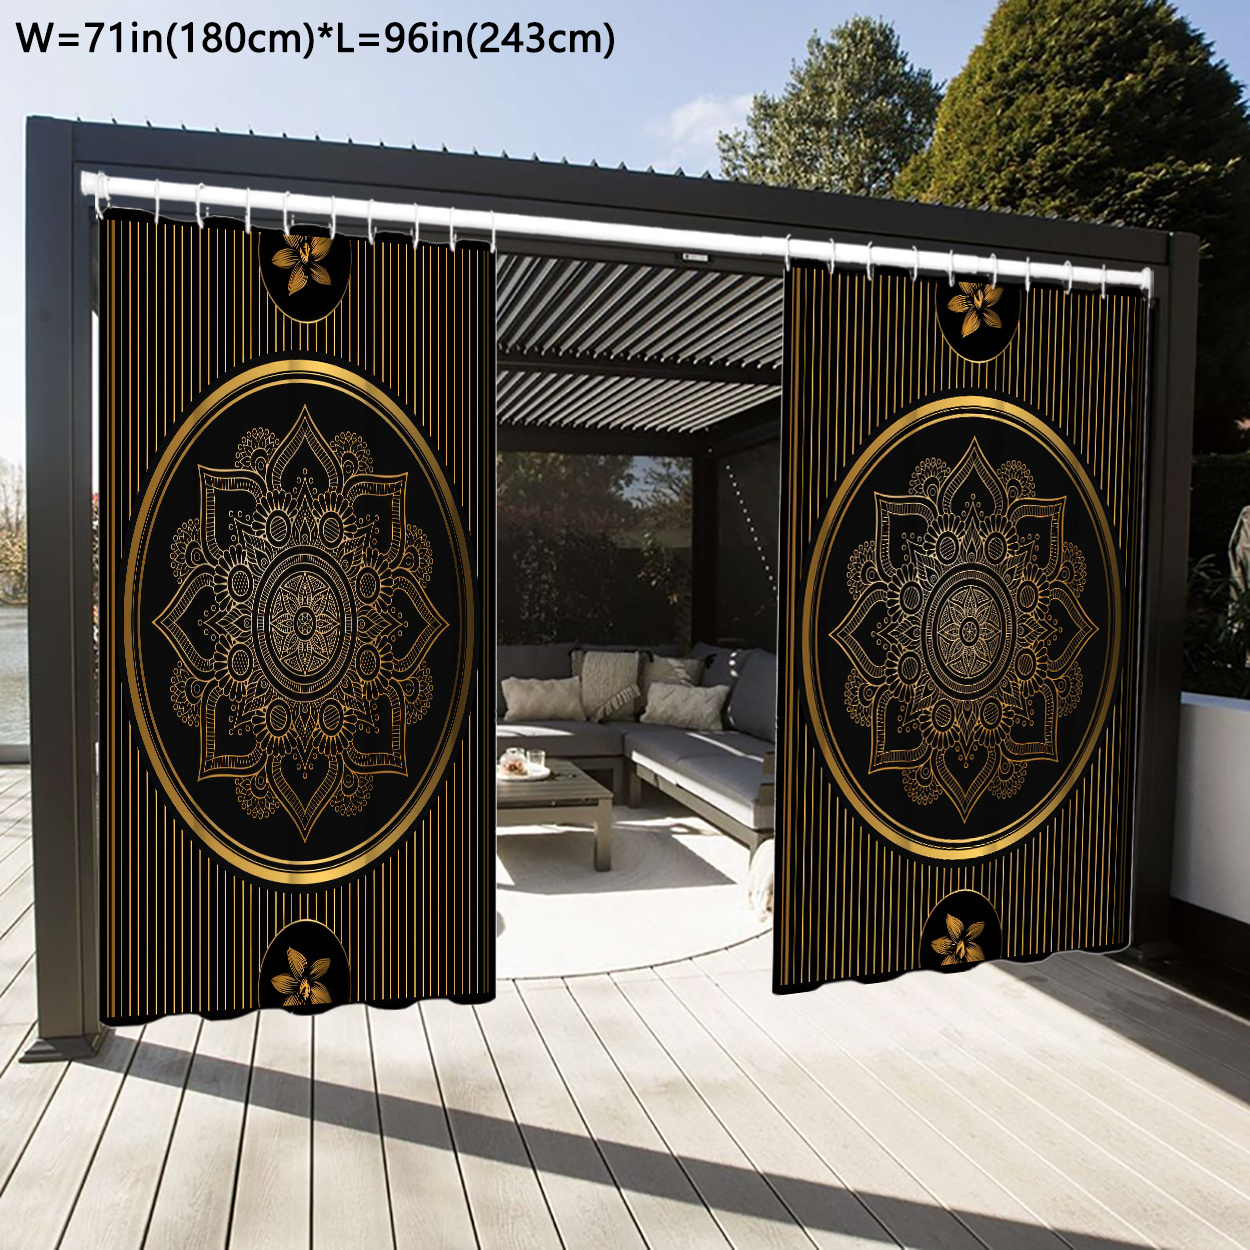 

1pc Waterproof Outdoor Curtain, Boho Style Mandala Pattern Curtain, Yard Curtain, Indoor And Outdoor Patio Privacy Curtain, 71*96in